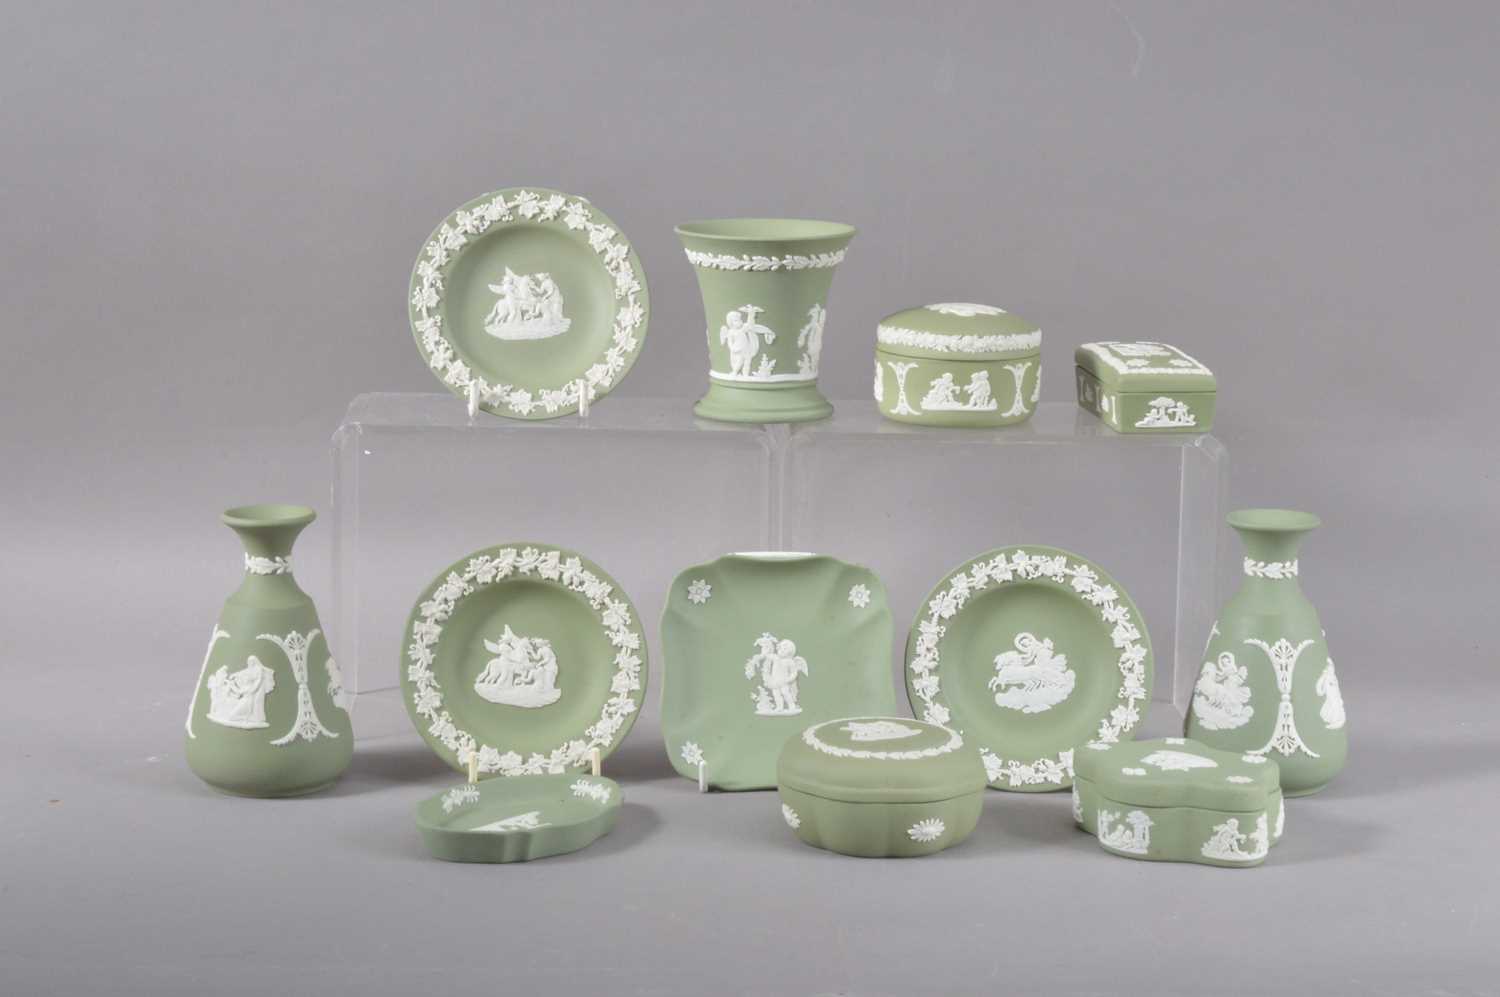 Lot 28 - A collection of modern Wedgwood jasperware items